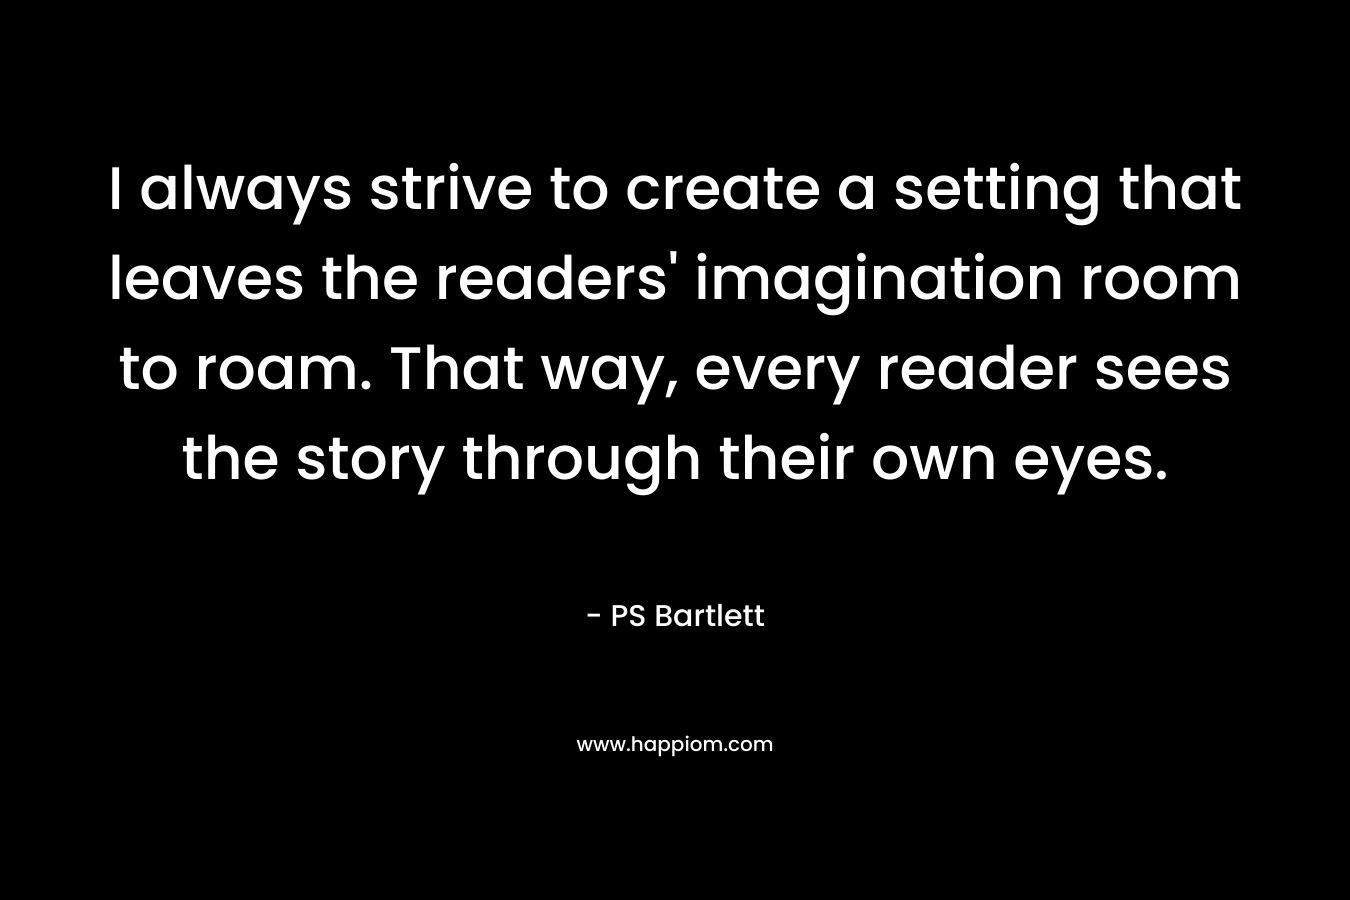 I always strive to create a setting that leaves the readers' imagination room to roam. That way, every reader sees the story through their own eyes.